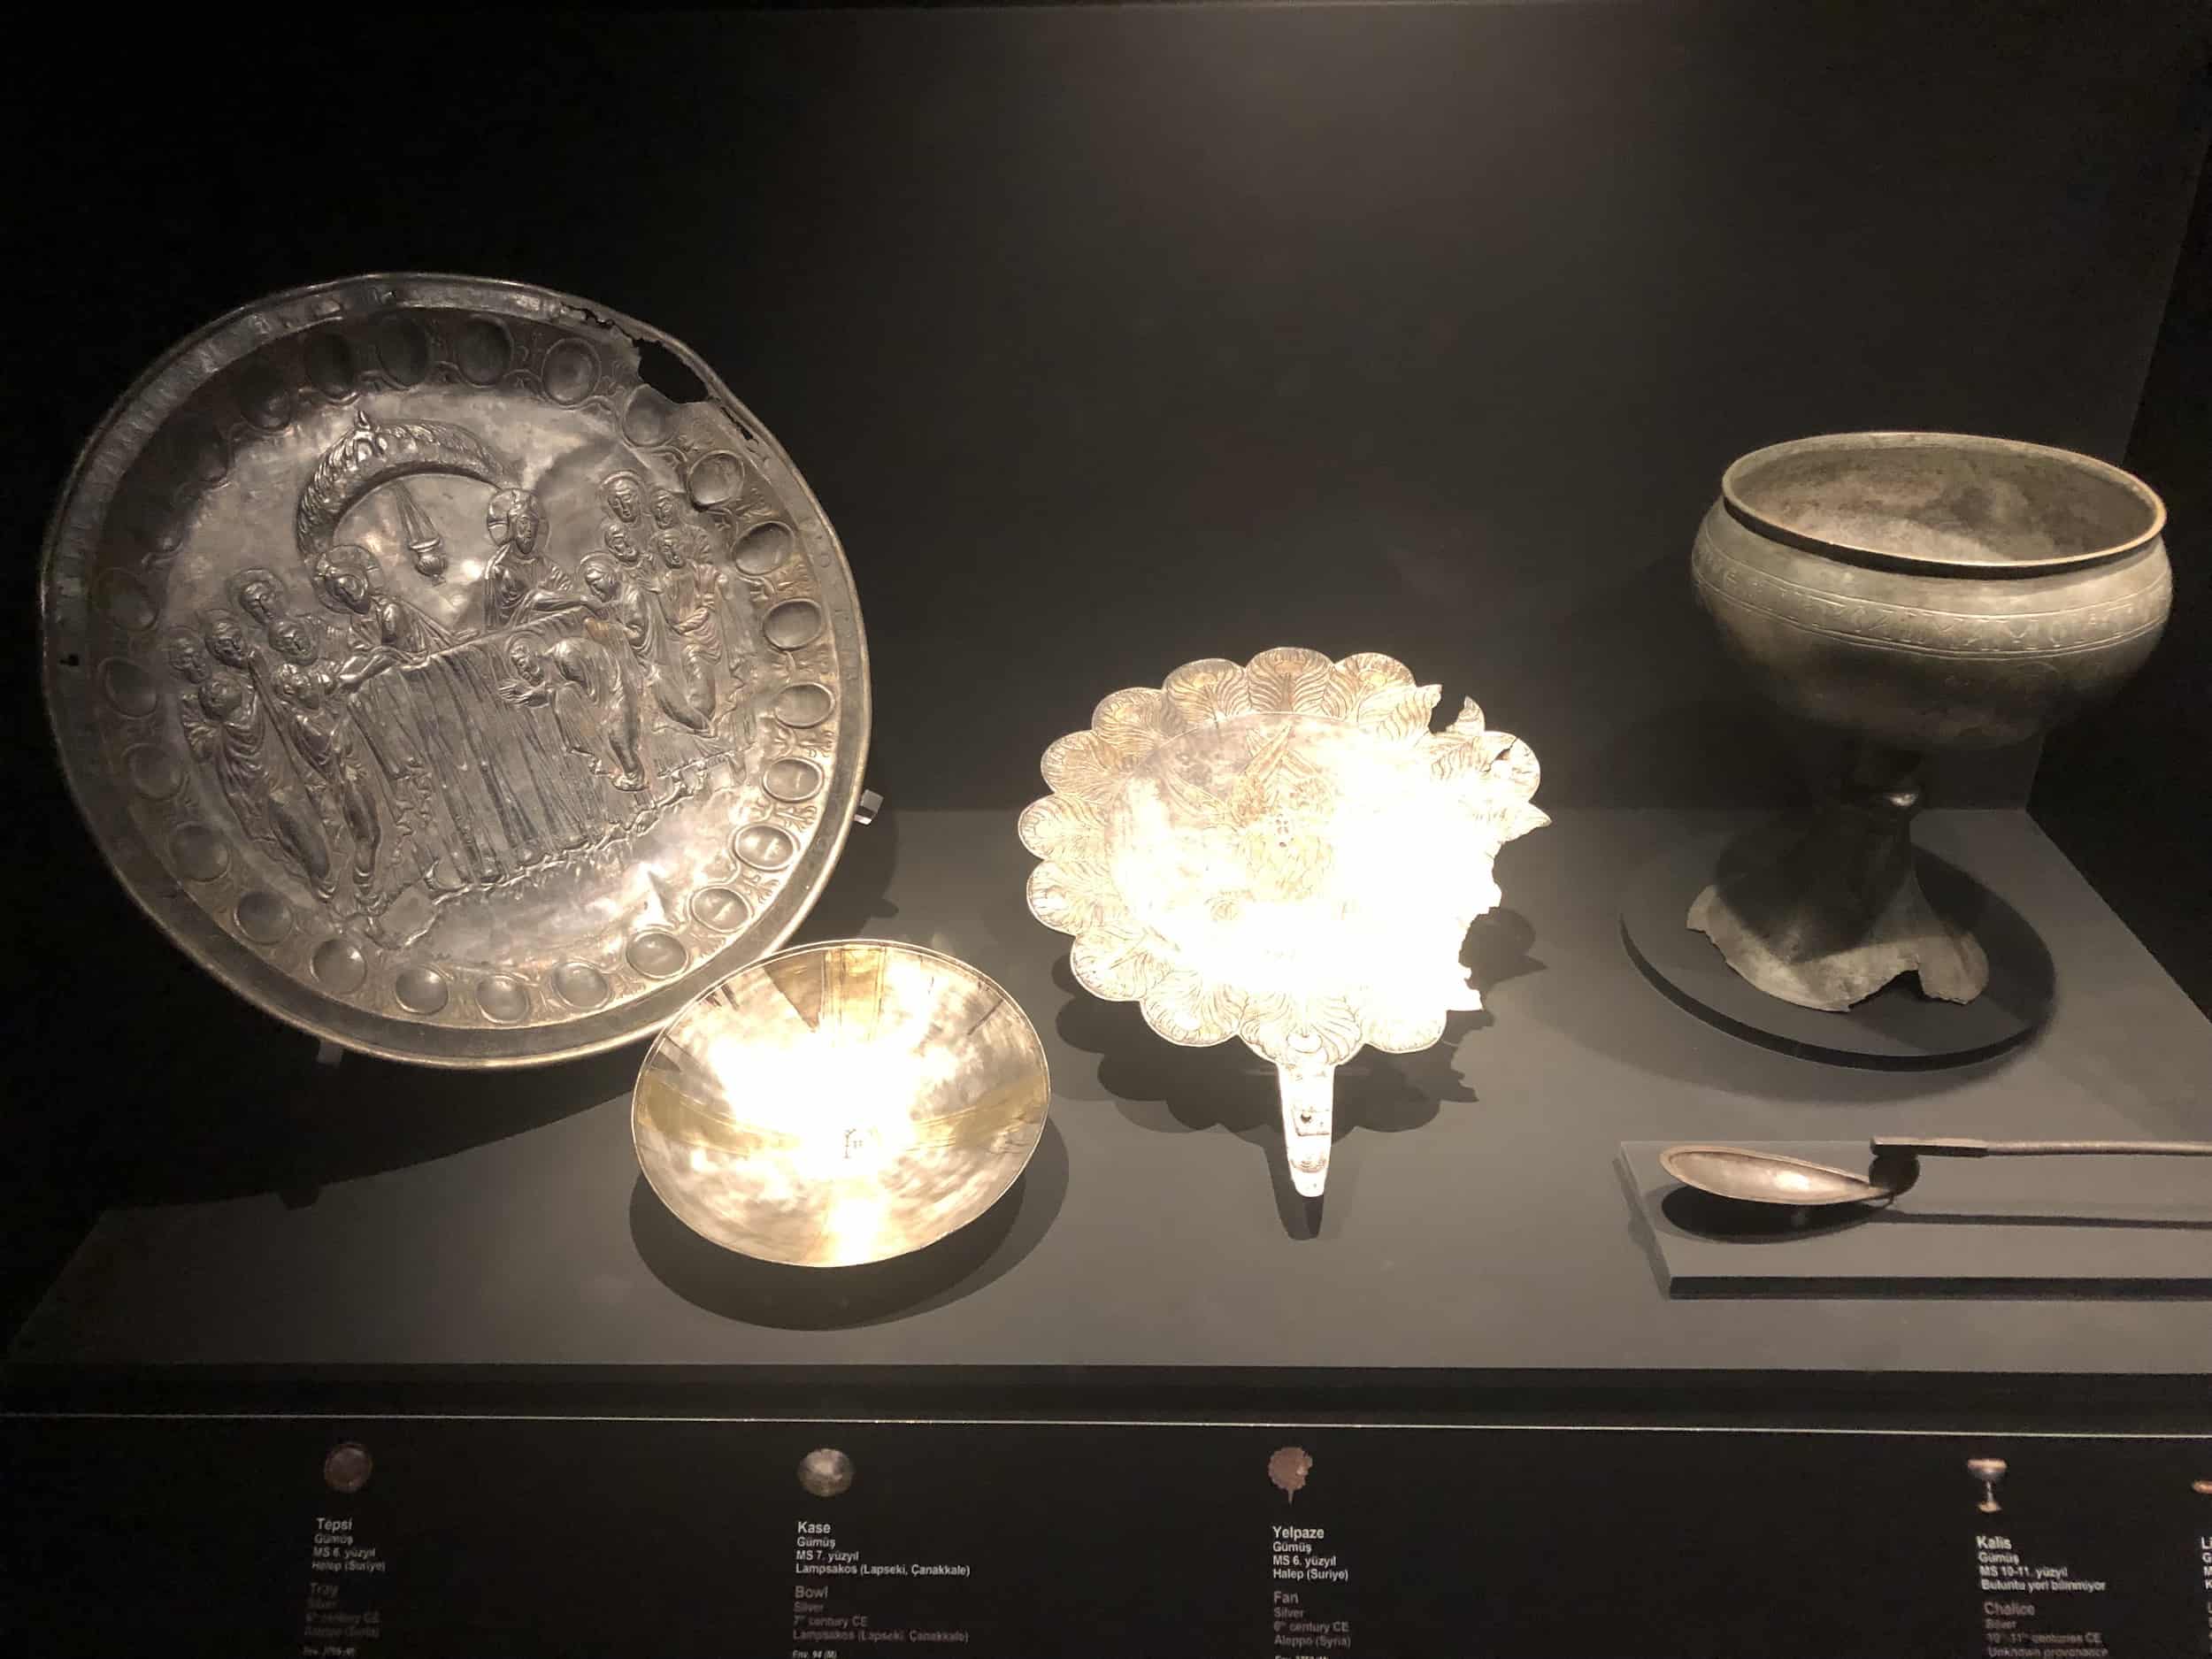 Silver tray from Aleppo, Syria, 6th century (left); silver bowl from Lampsakos, 7th century (left center); and silver fan from Aleppo, 6th century (center)